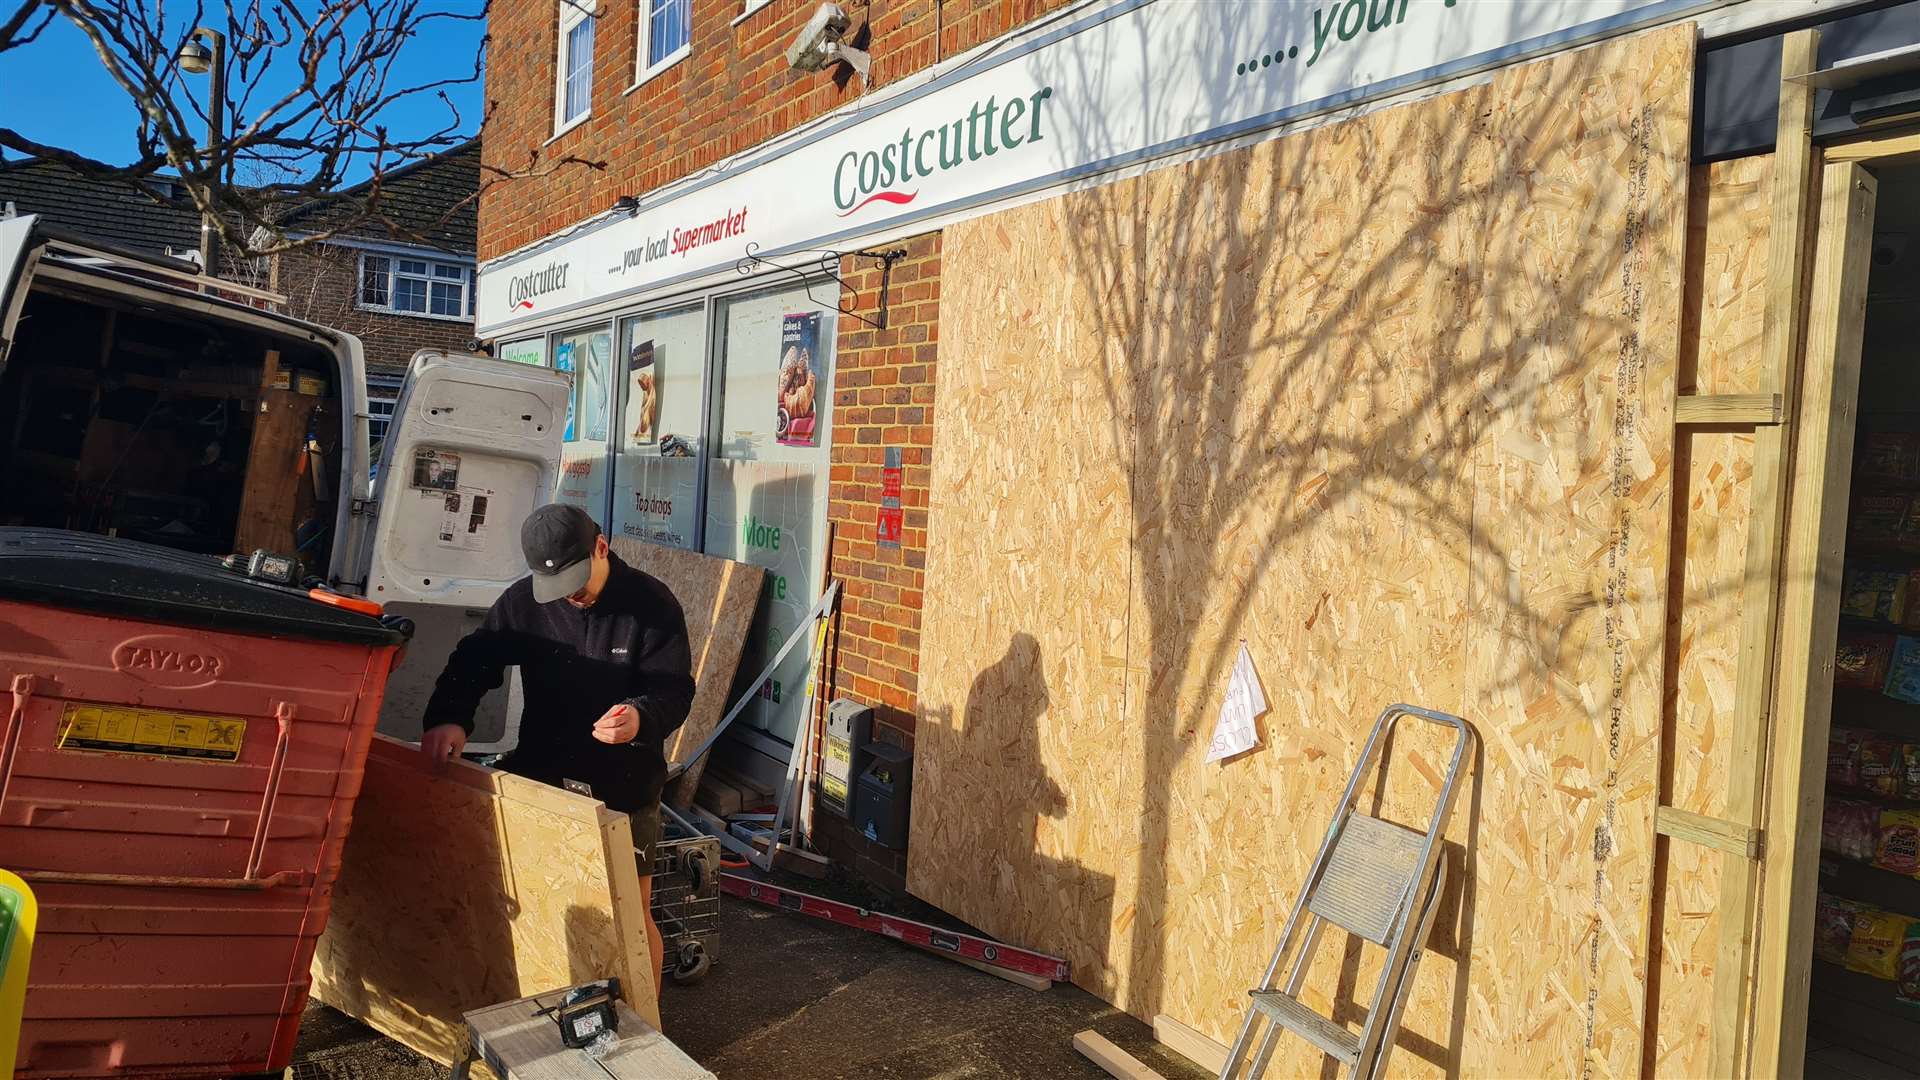 Ram-raiders have caused thousands pounds worth of damage to Costcutter in Blean